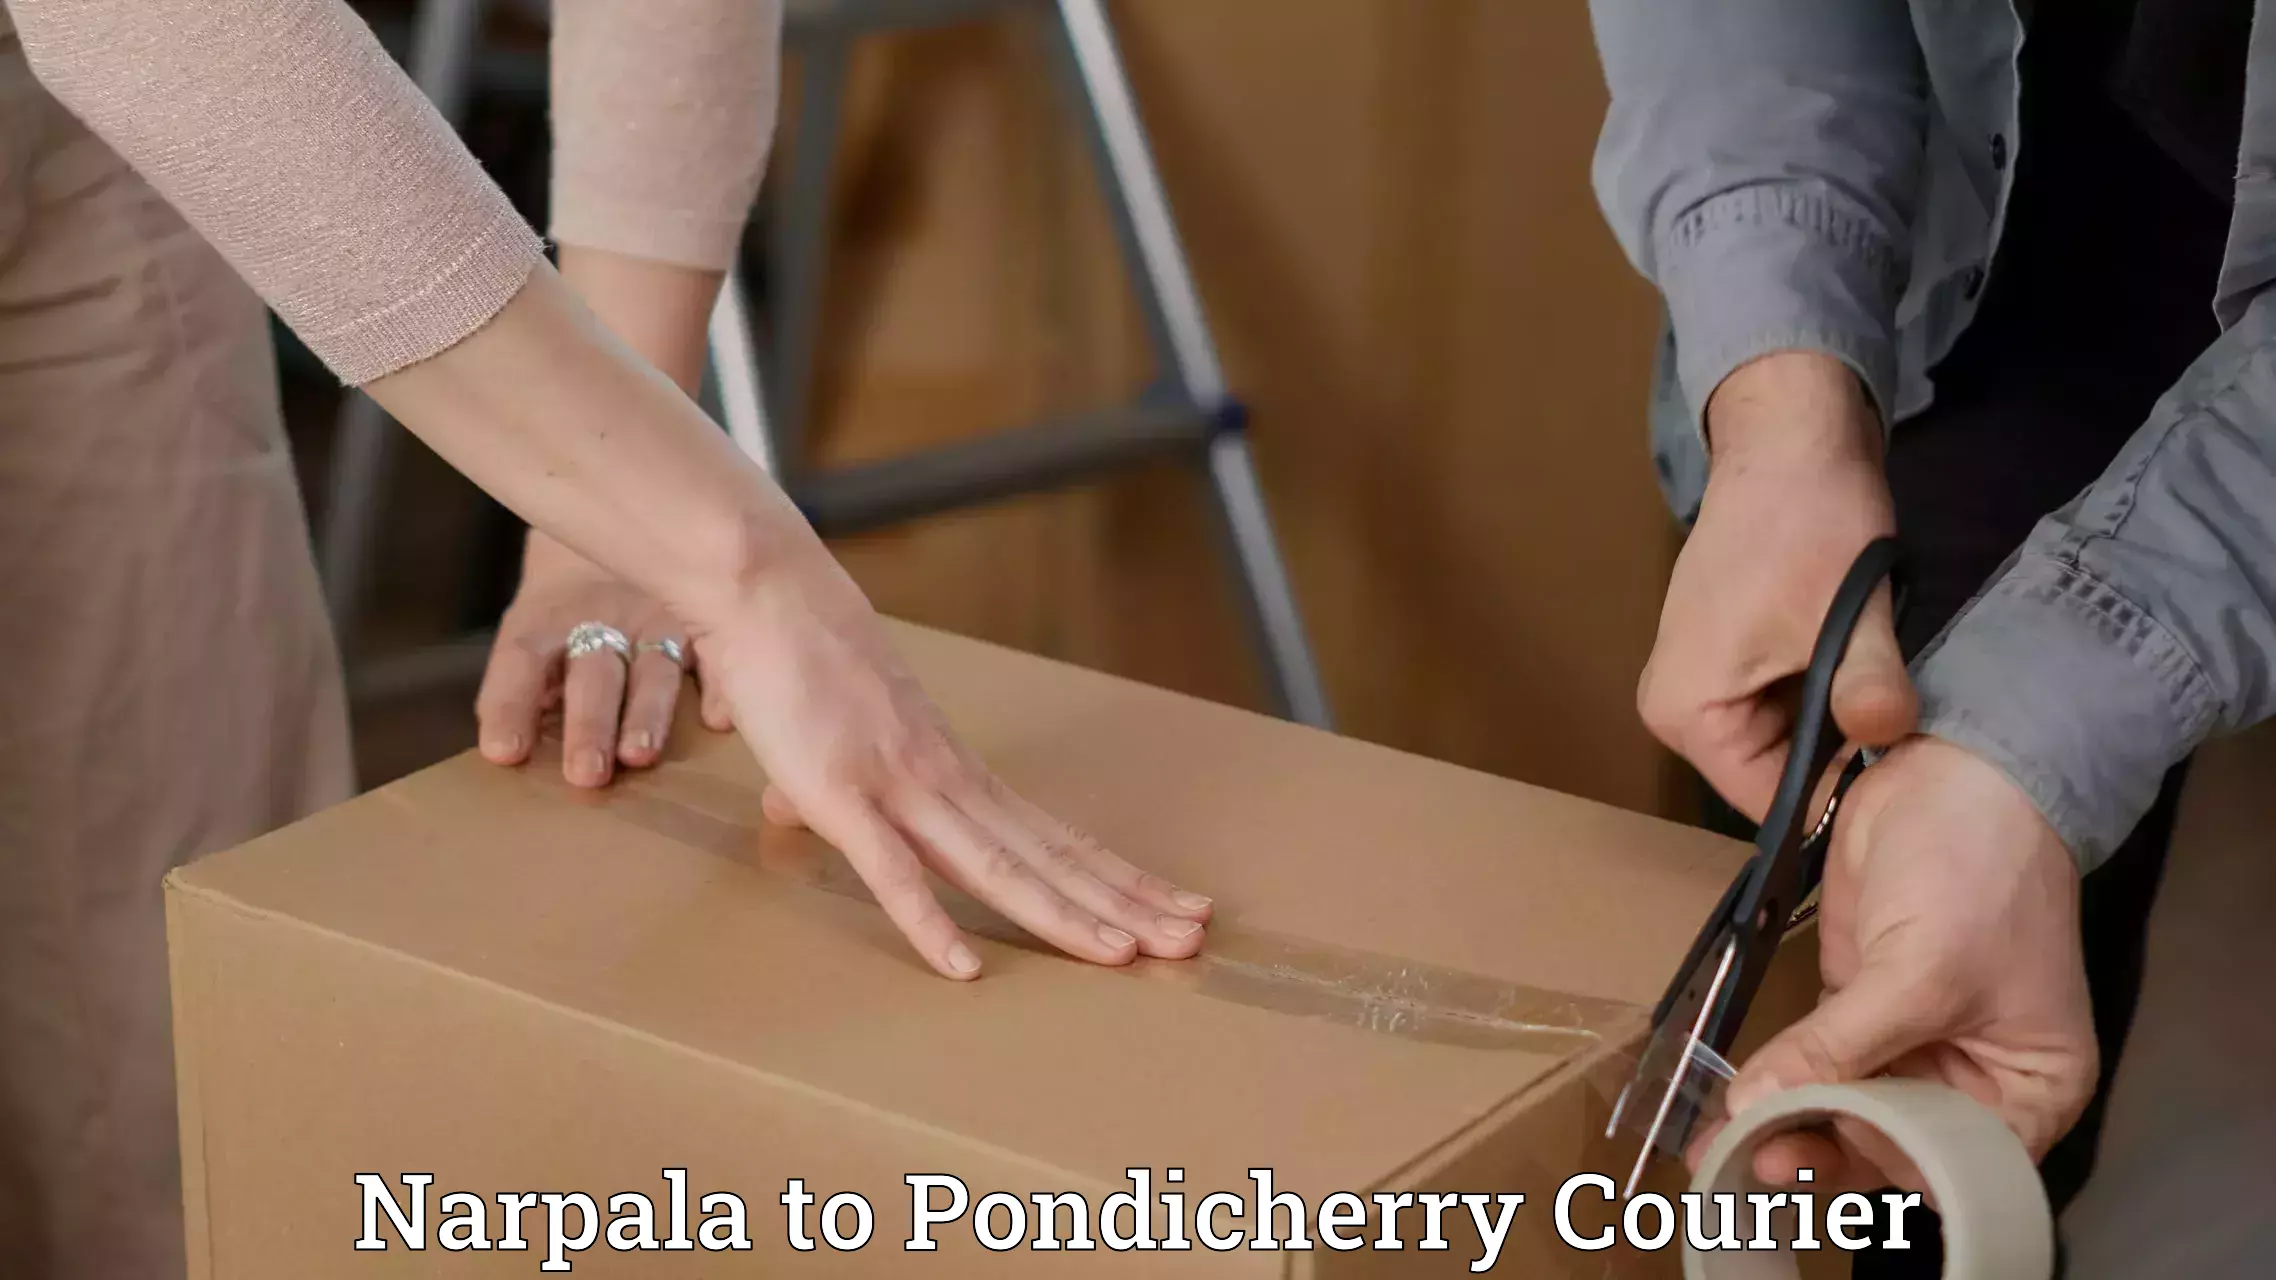 Reliable courier service Narpala to Pondicherry University